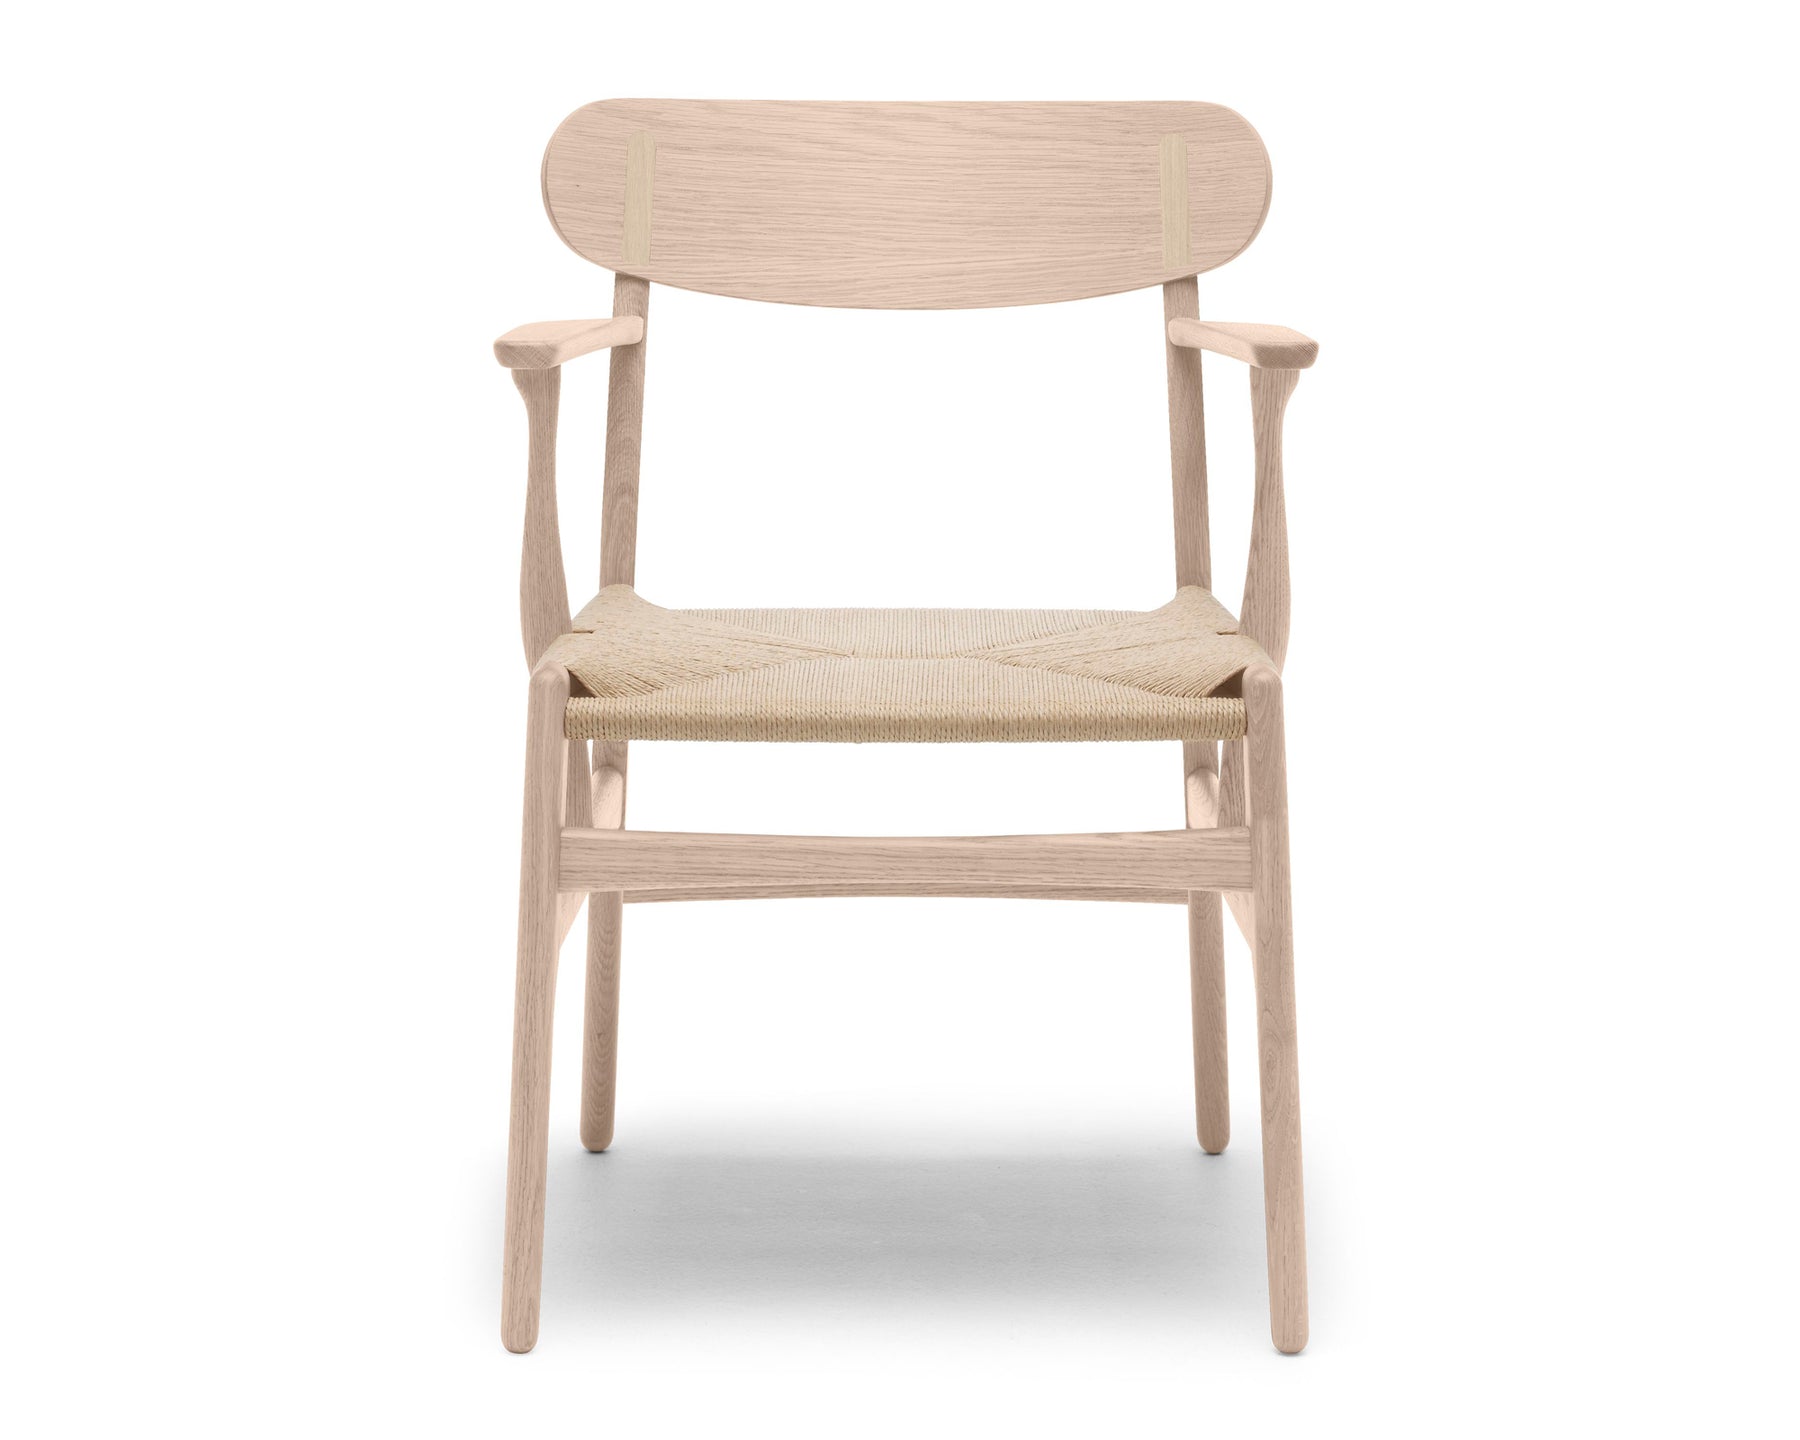 Pale Wood Dining Chair | DSHOP